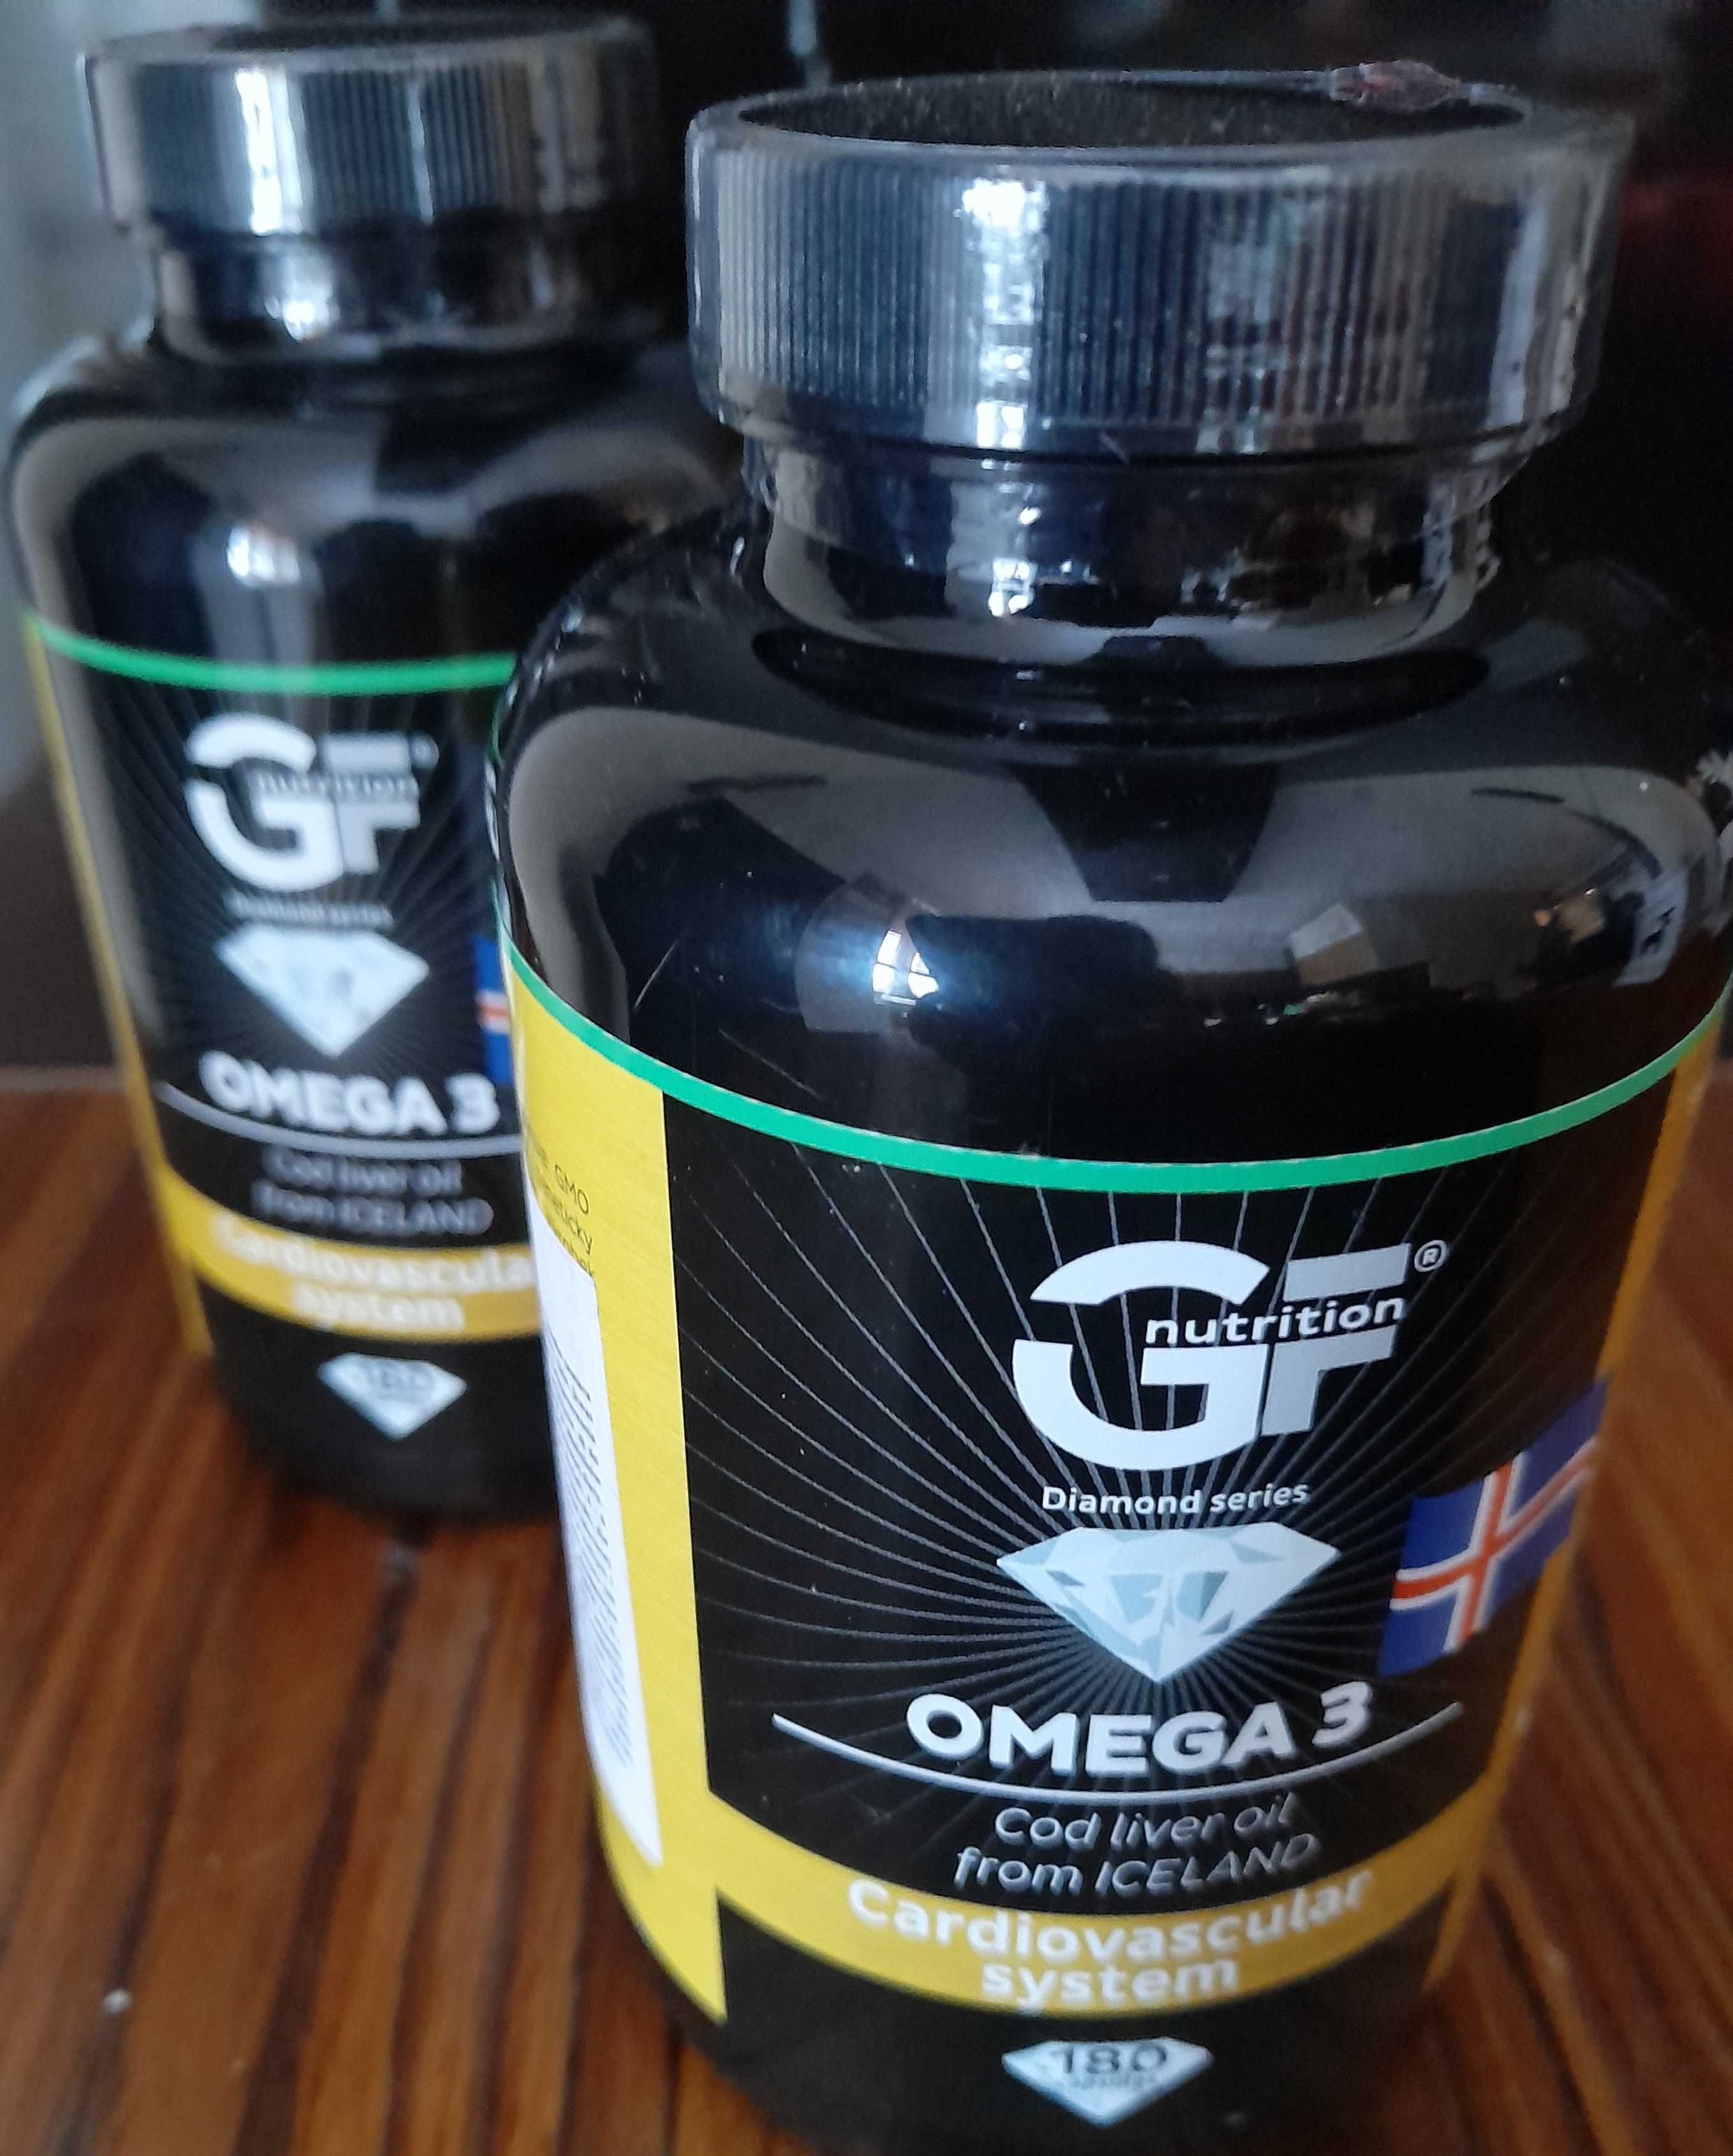 OMEGA 3  Cod liver oil from ICELAND